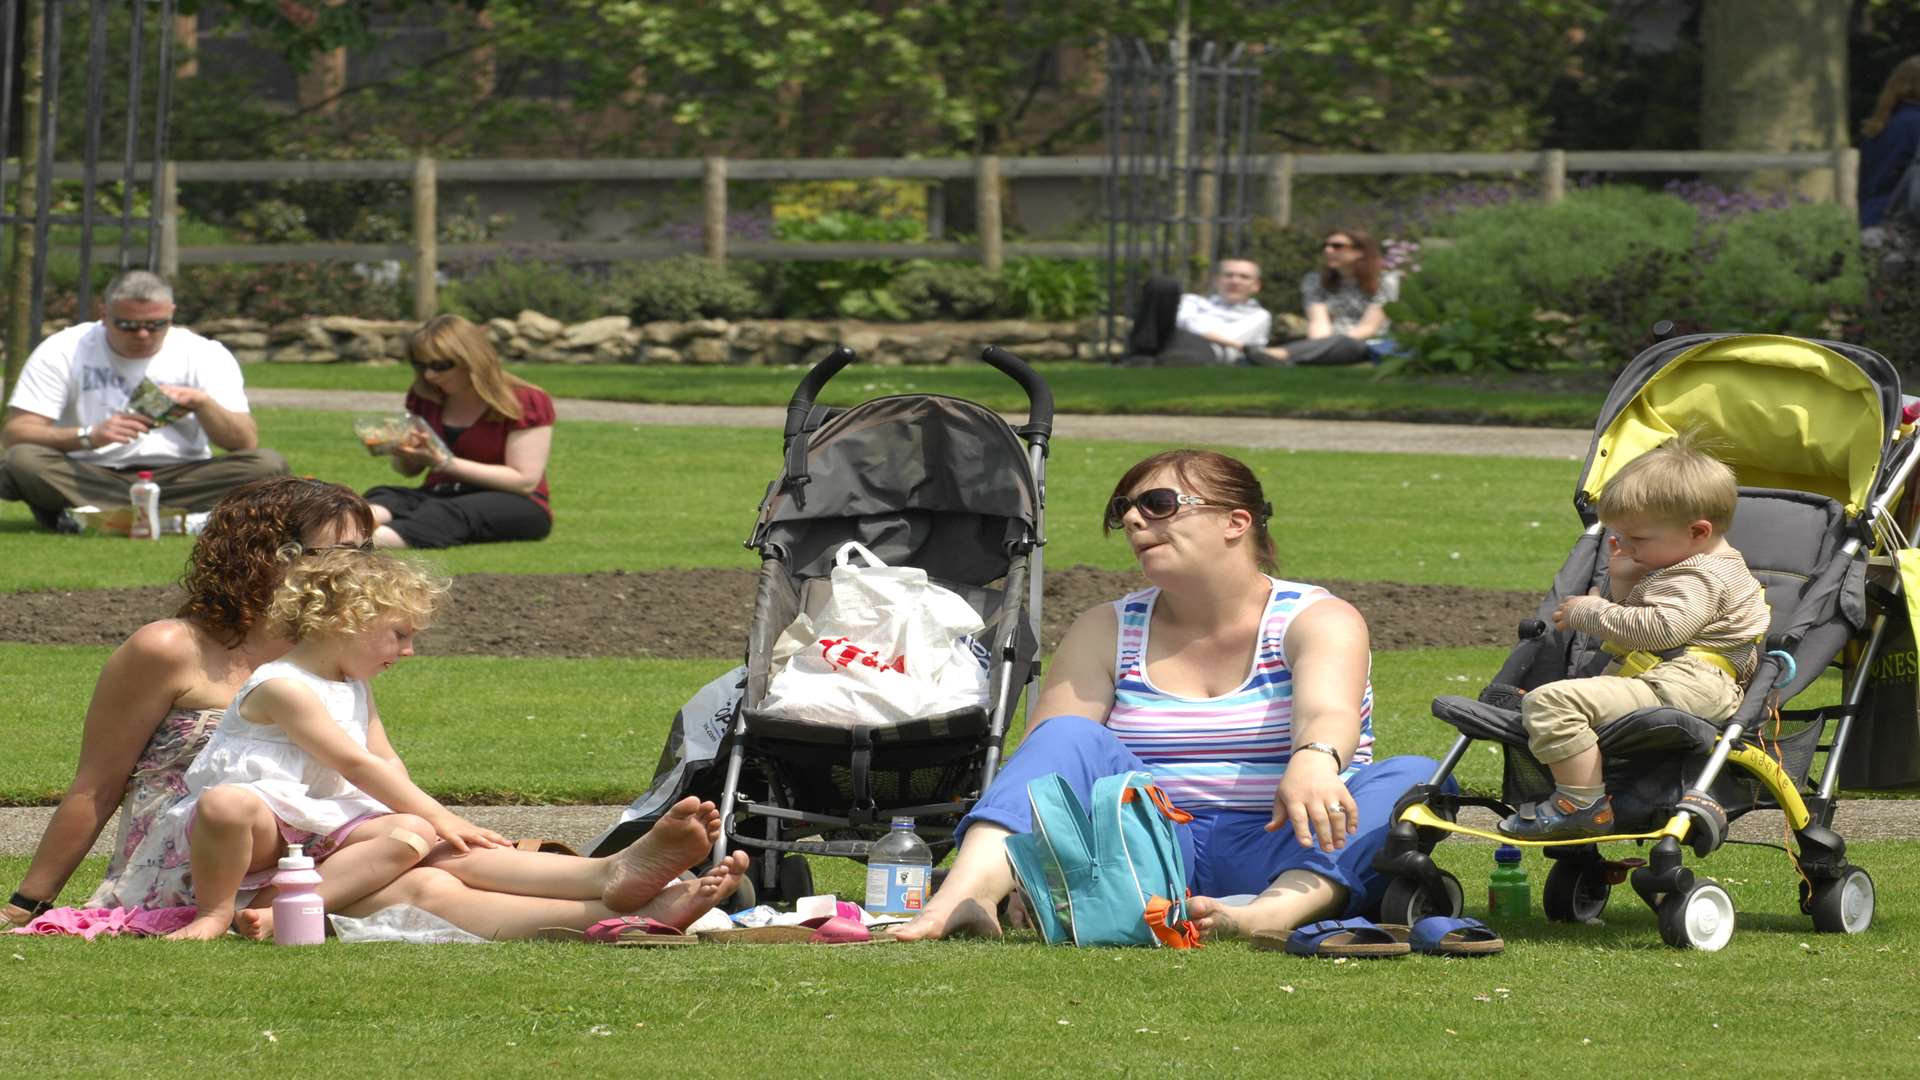 People donned shorts during the summer months in Brenchley Gardens